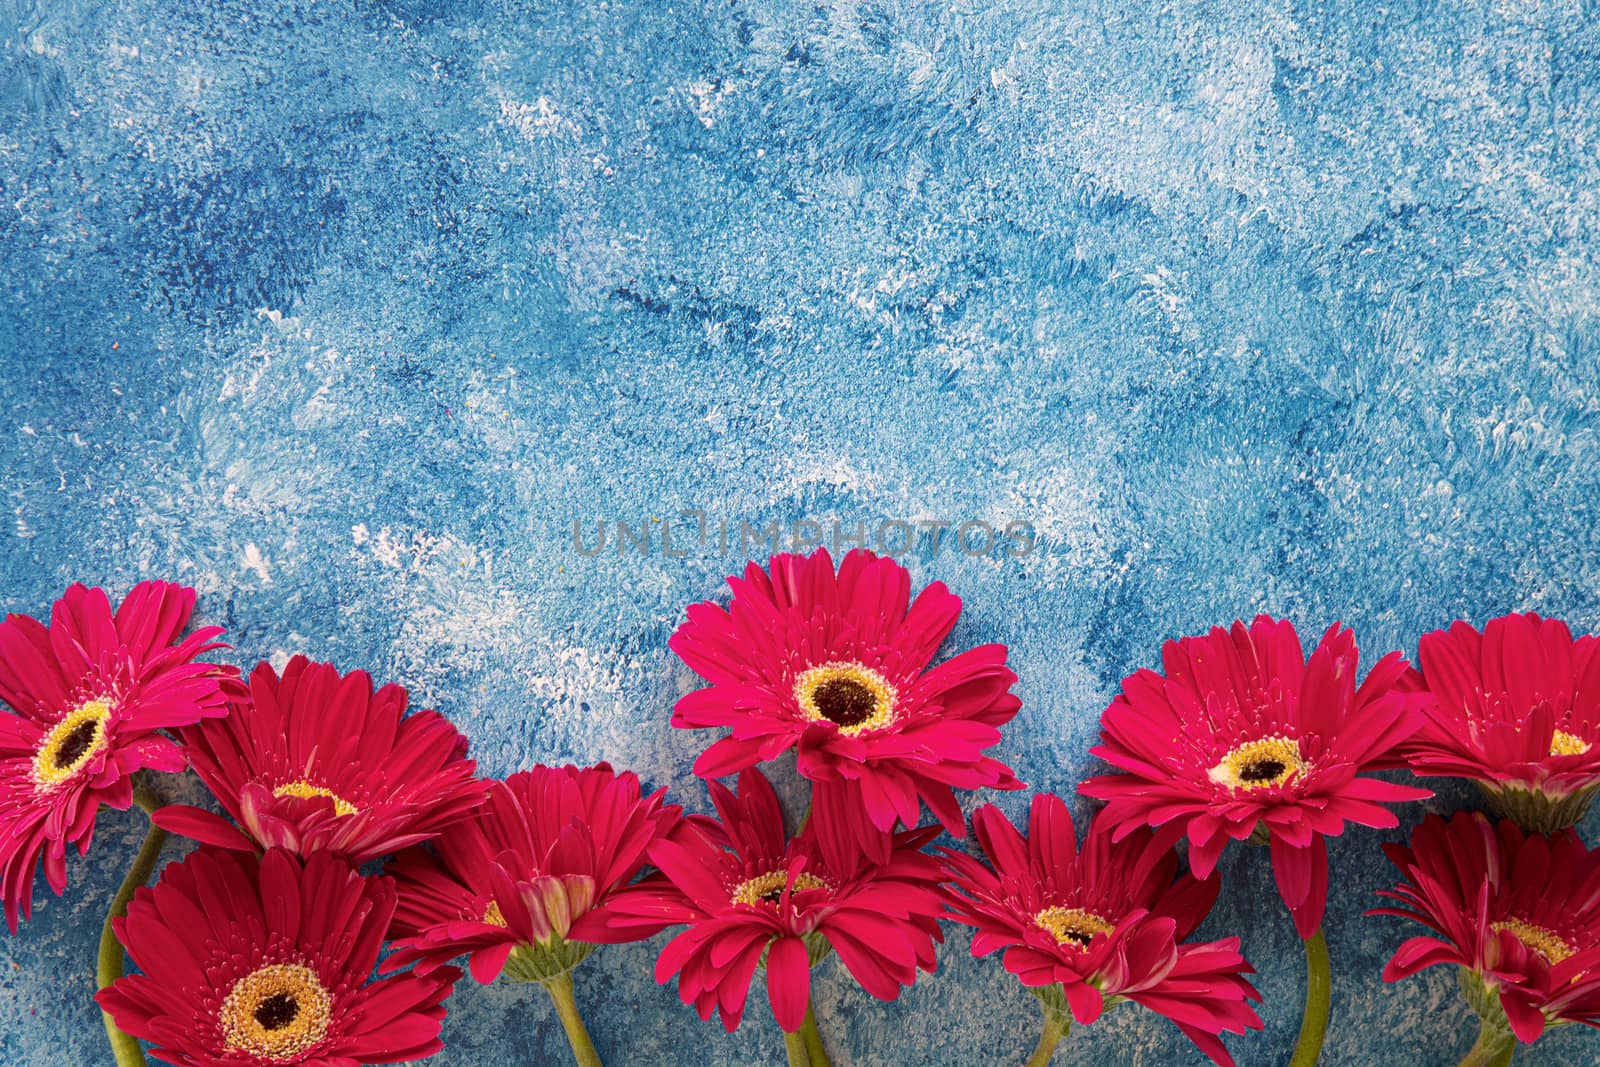 Bright red gerbera on blue and white acrylic paint background by Nawoot